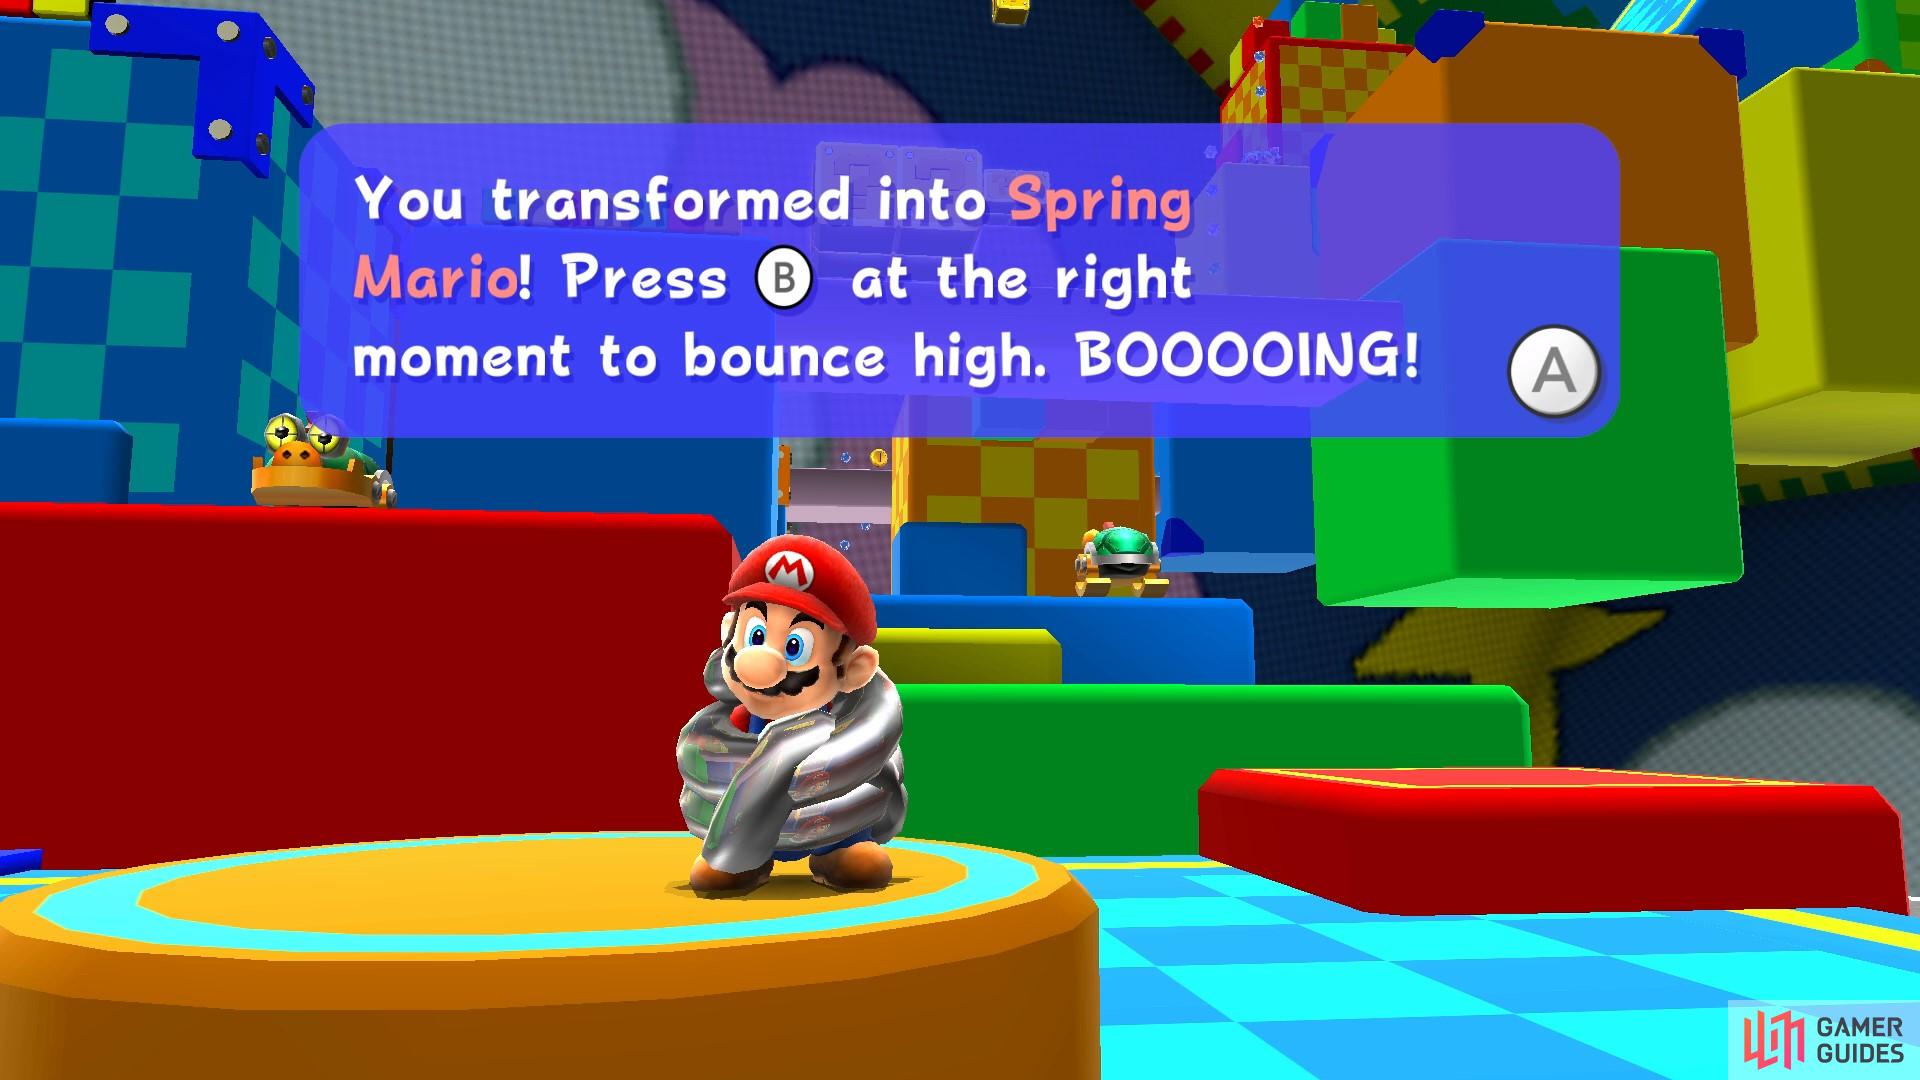 Spring Mario can jump really high but he's tricky to control.